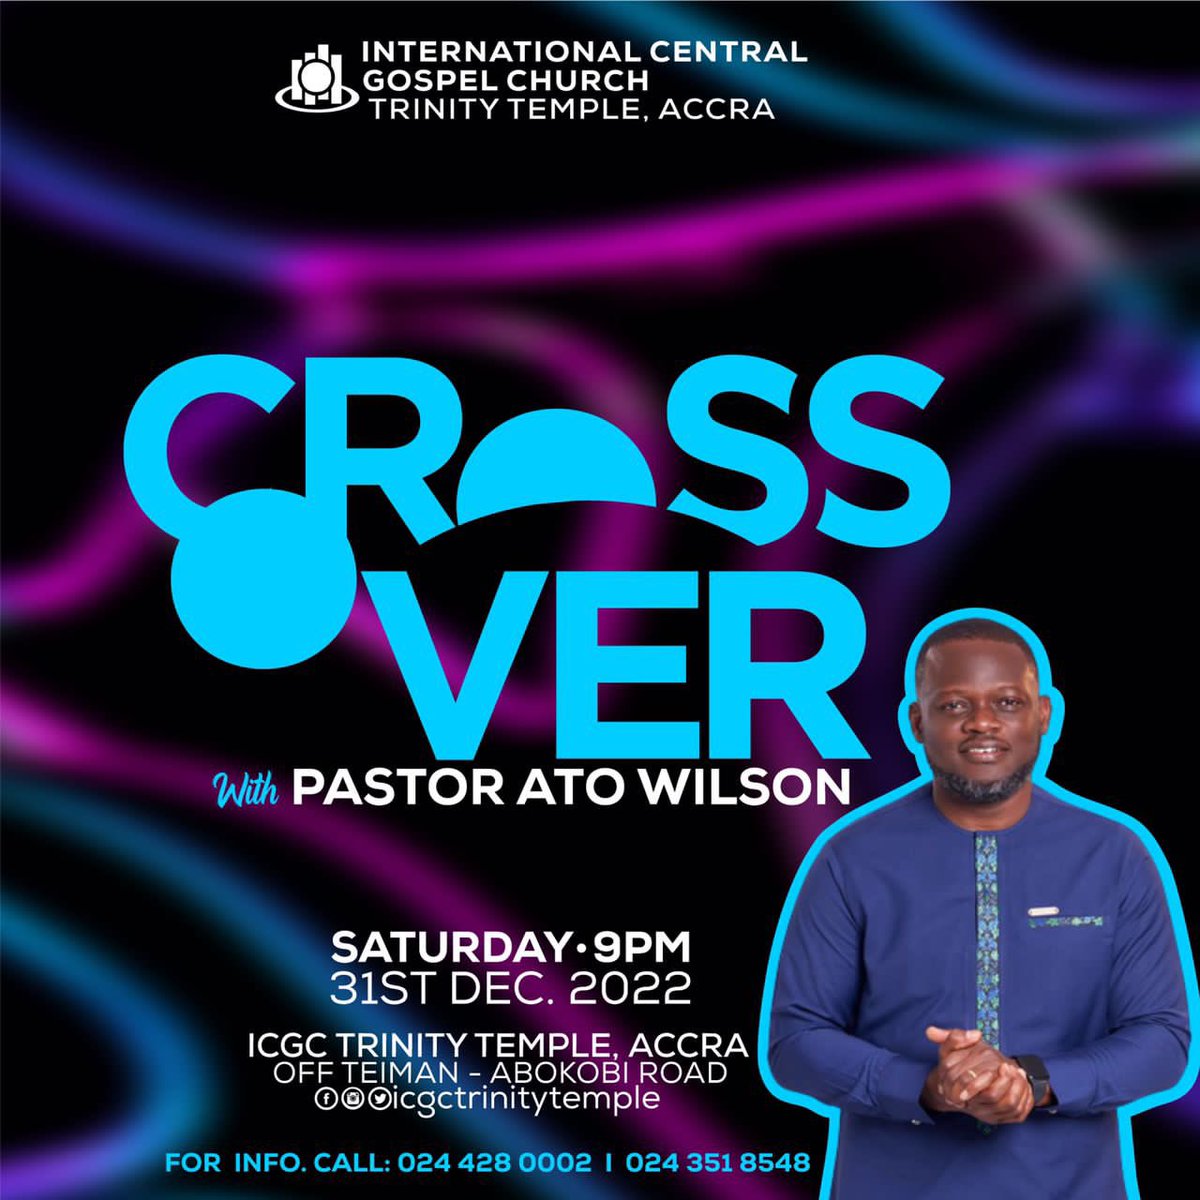 It’s at 9pm tonight! Join us to crossover into 2023! #WeAreICGC #YearOfIncrease #YearOfGathering